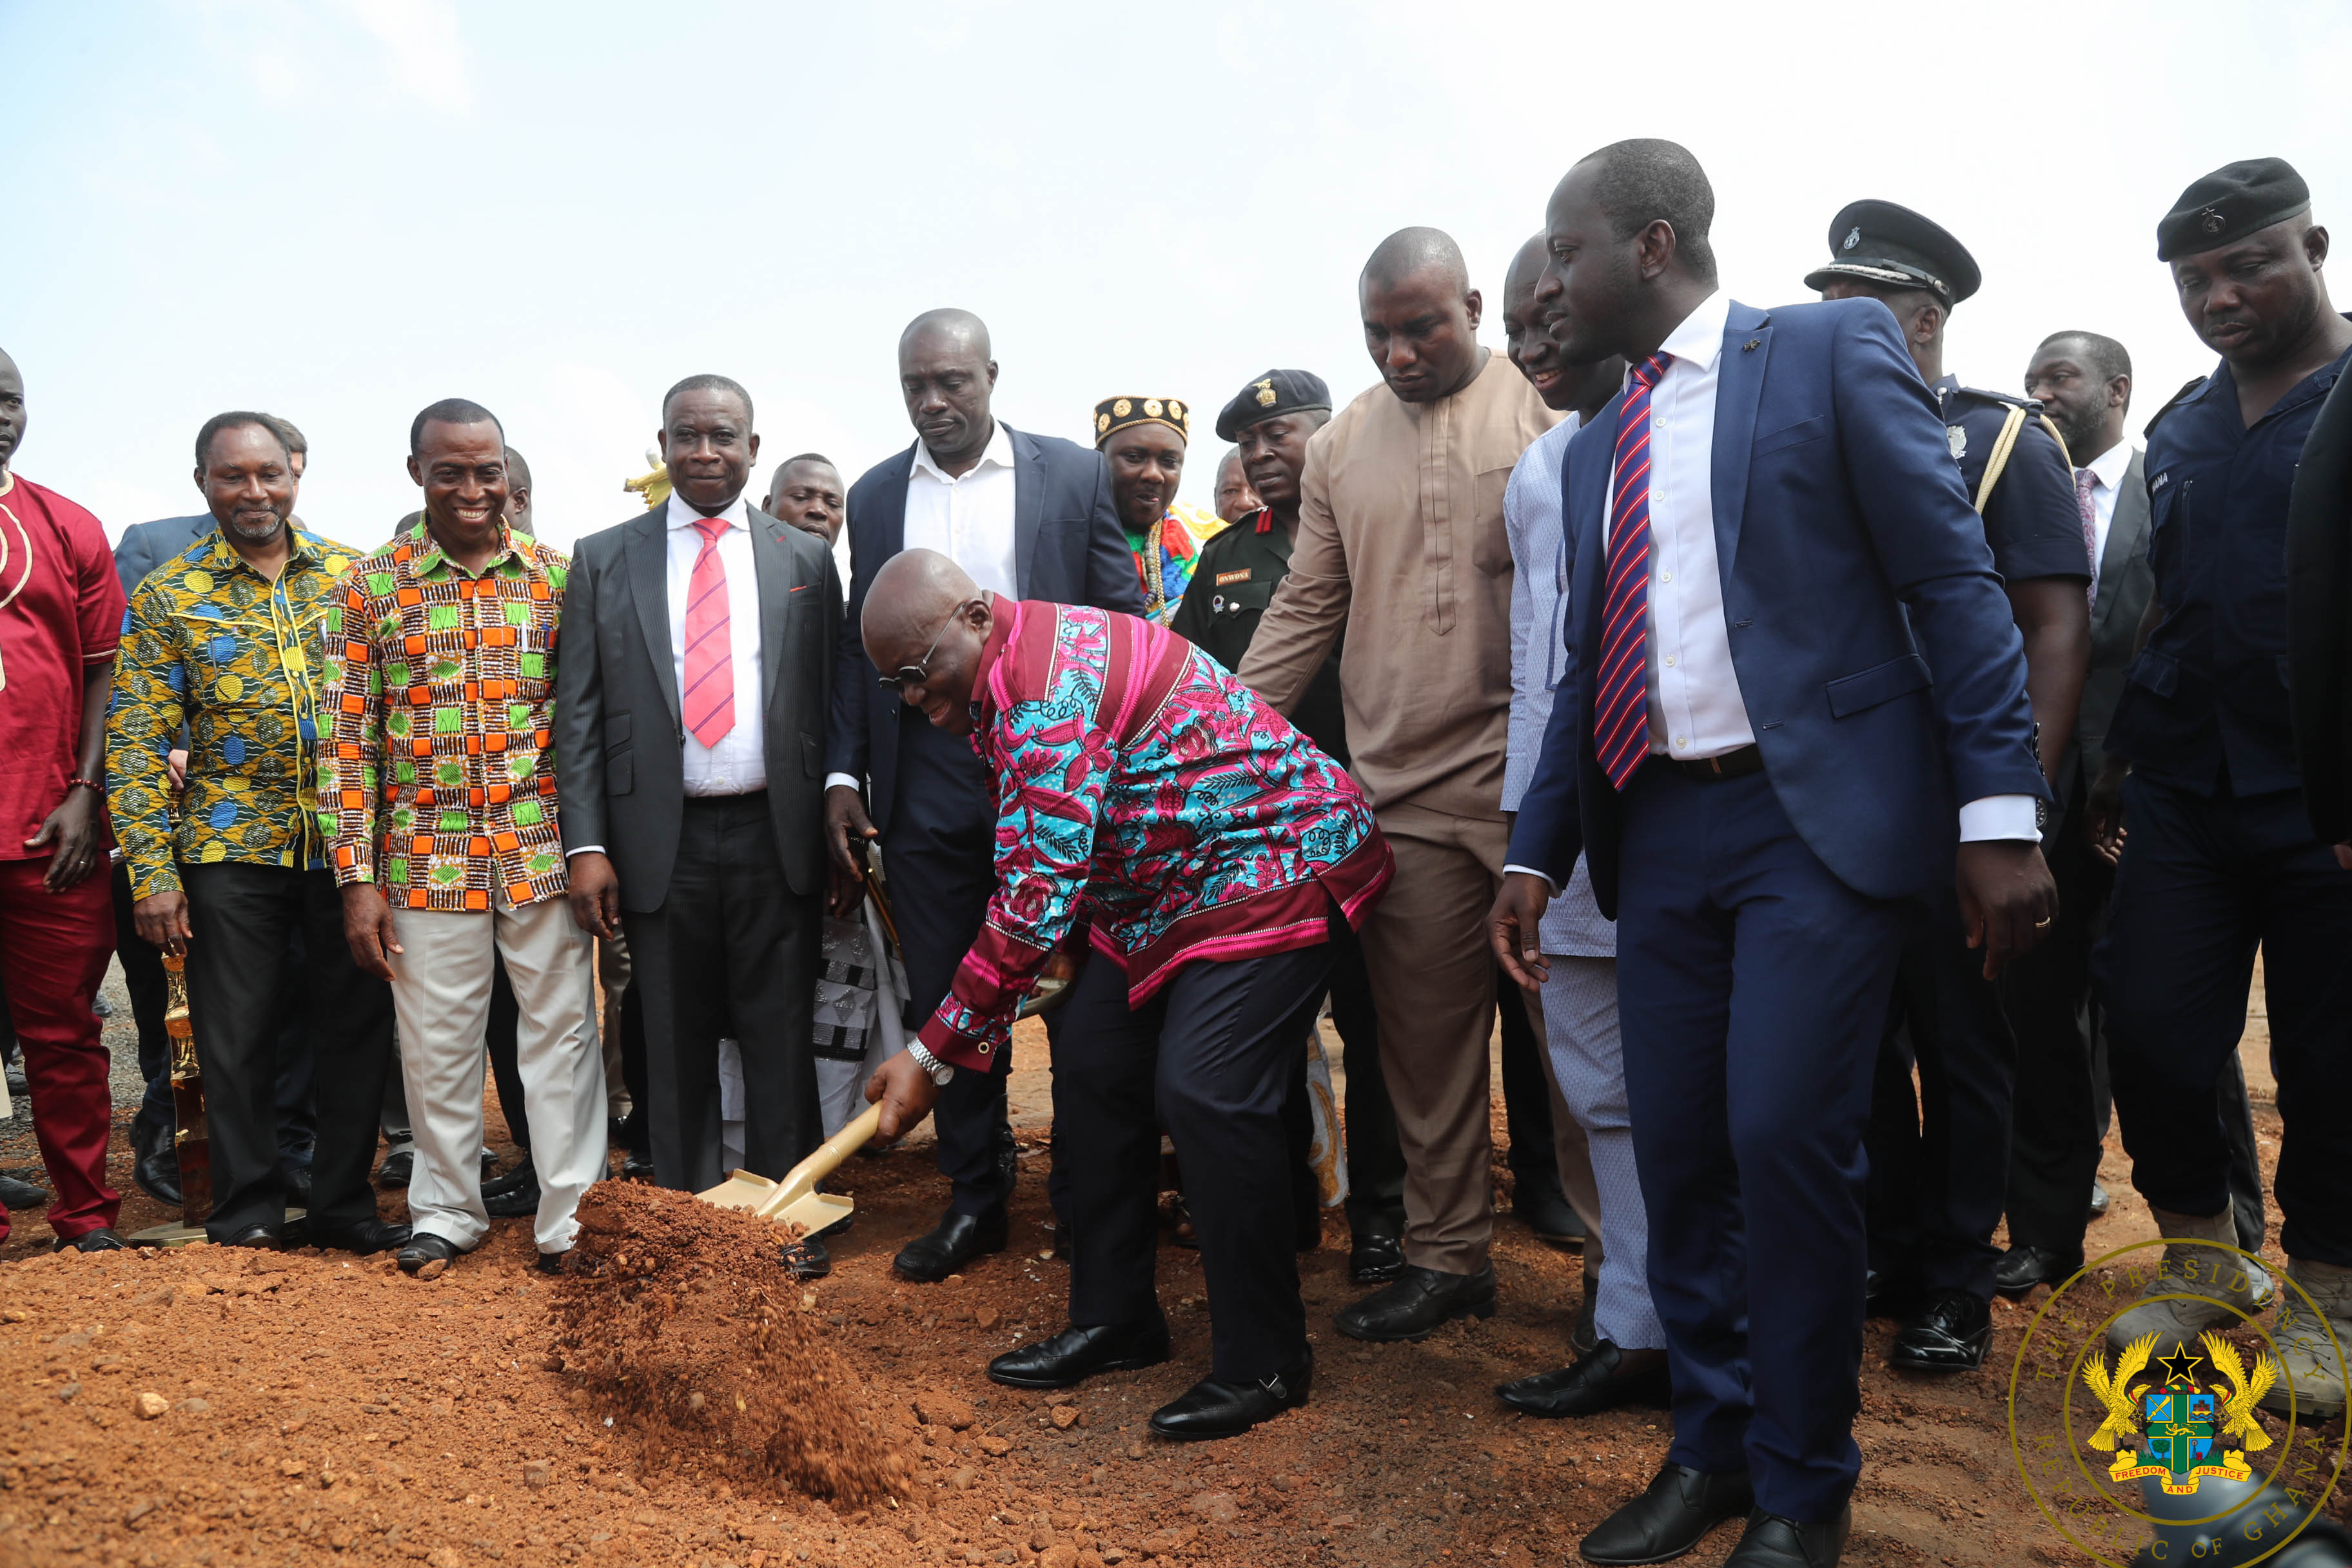 President Akufo-Addo cutting the sod for the construction of the 2,000 affordable housing project